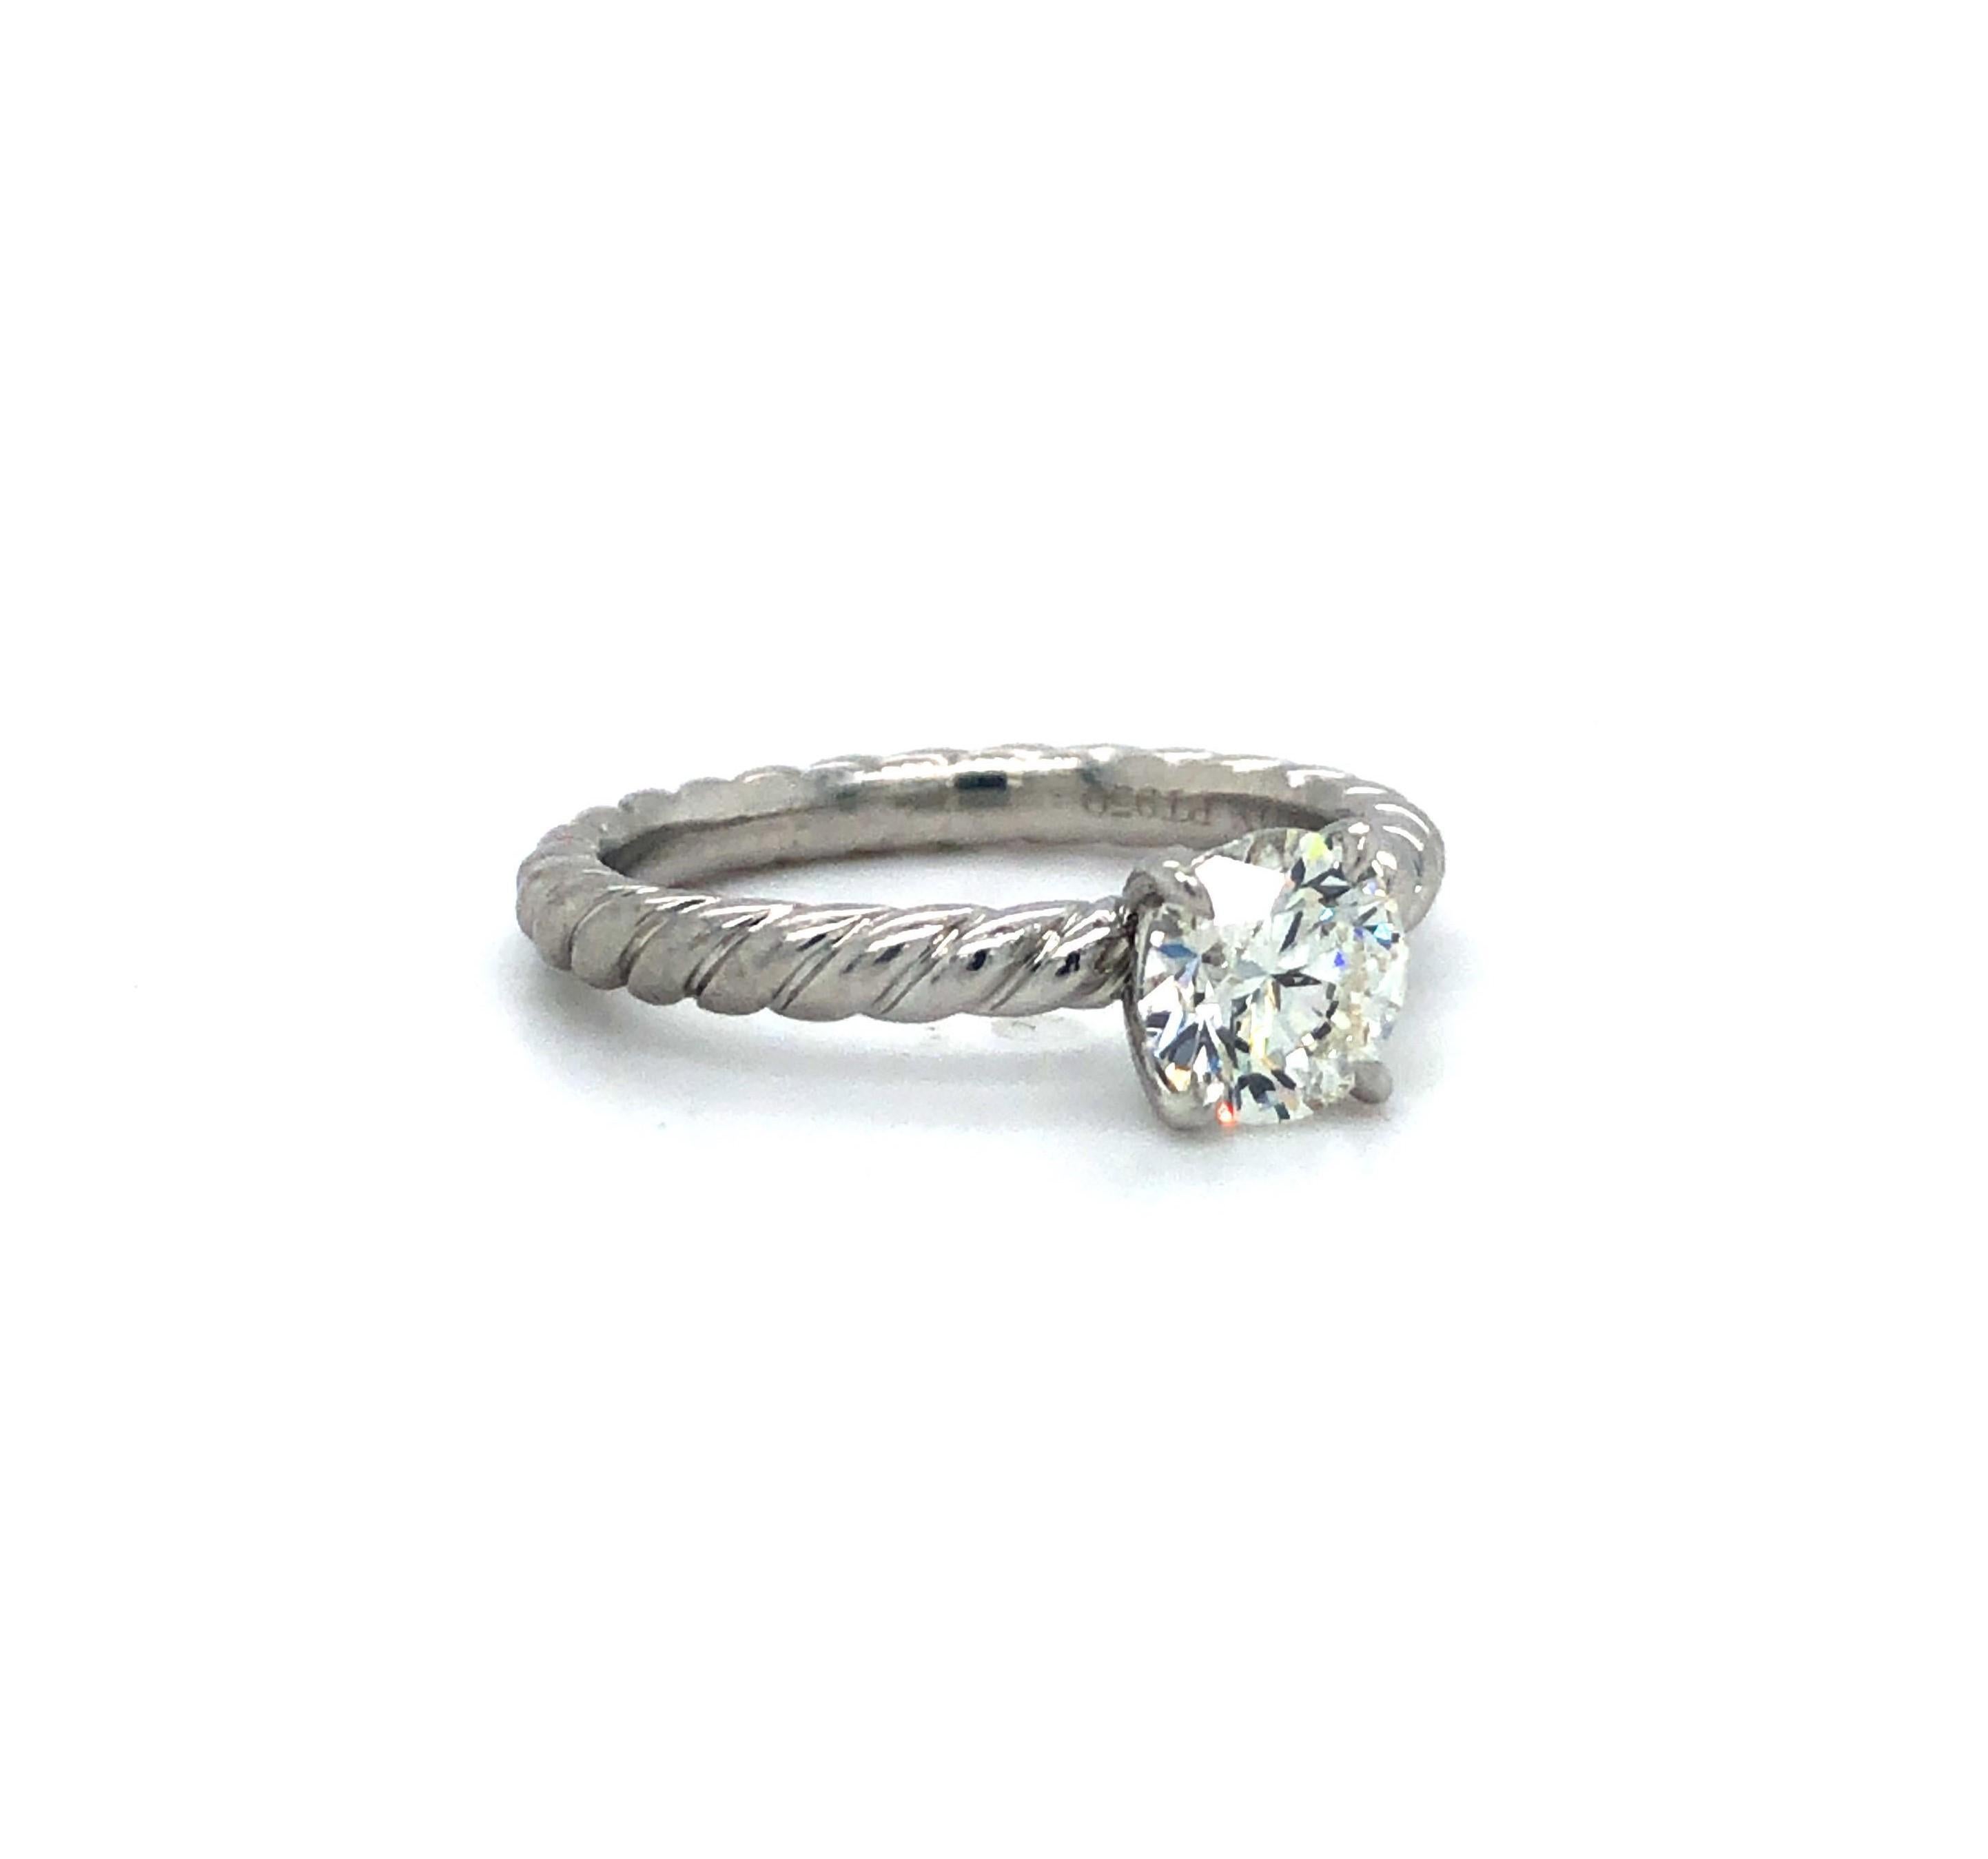 David Yurman Platinum .8ct Diamond GIA Solitaire Engagement Ring Size 5.25

Condition:  Excellent Condition, Professionally Cleaned and Polished
Metal:  Platinum (Marked, and Professionally Tested)
Diamond:  Round Cut Brilliant 0.80ct